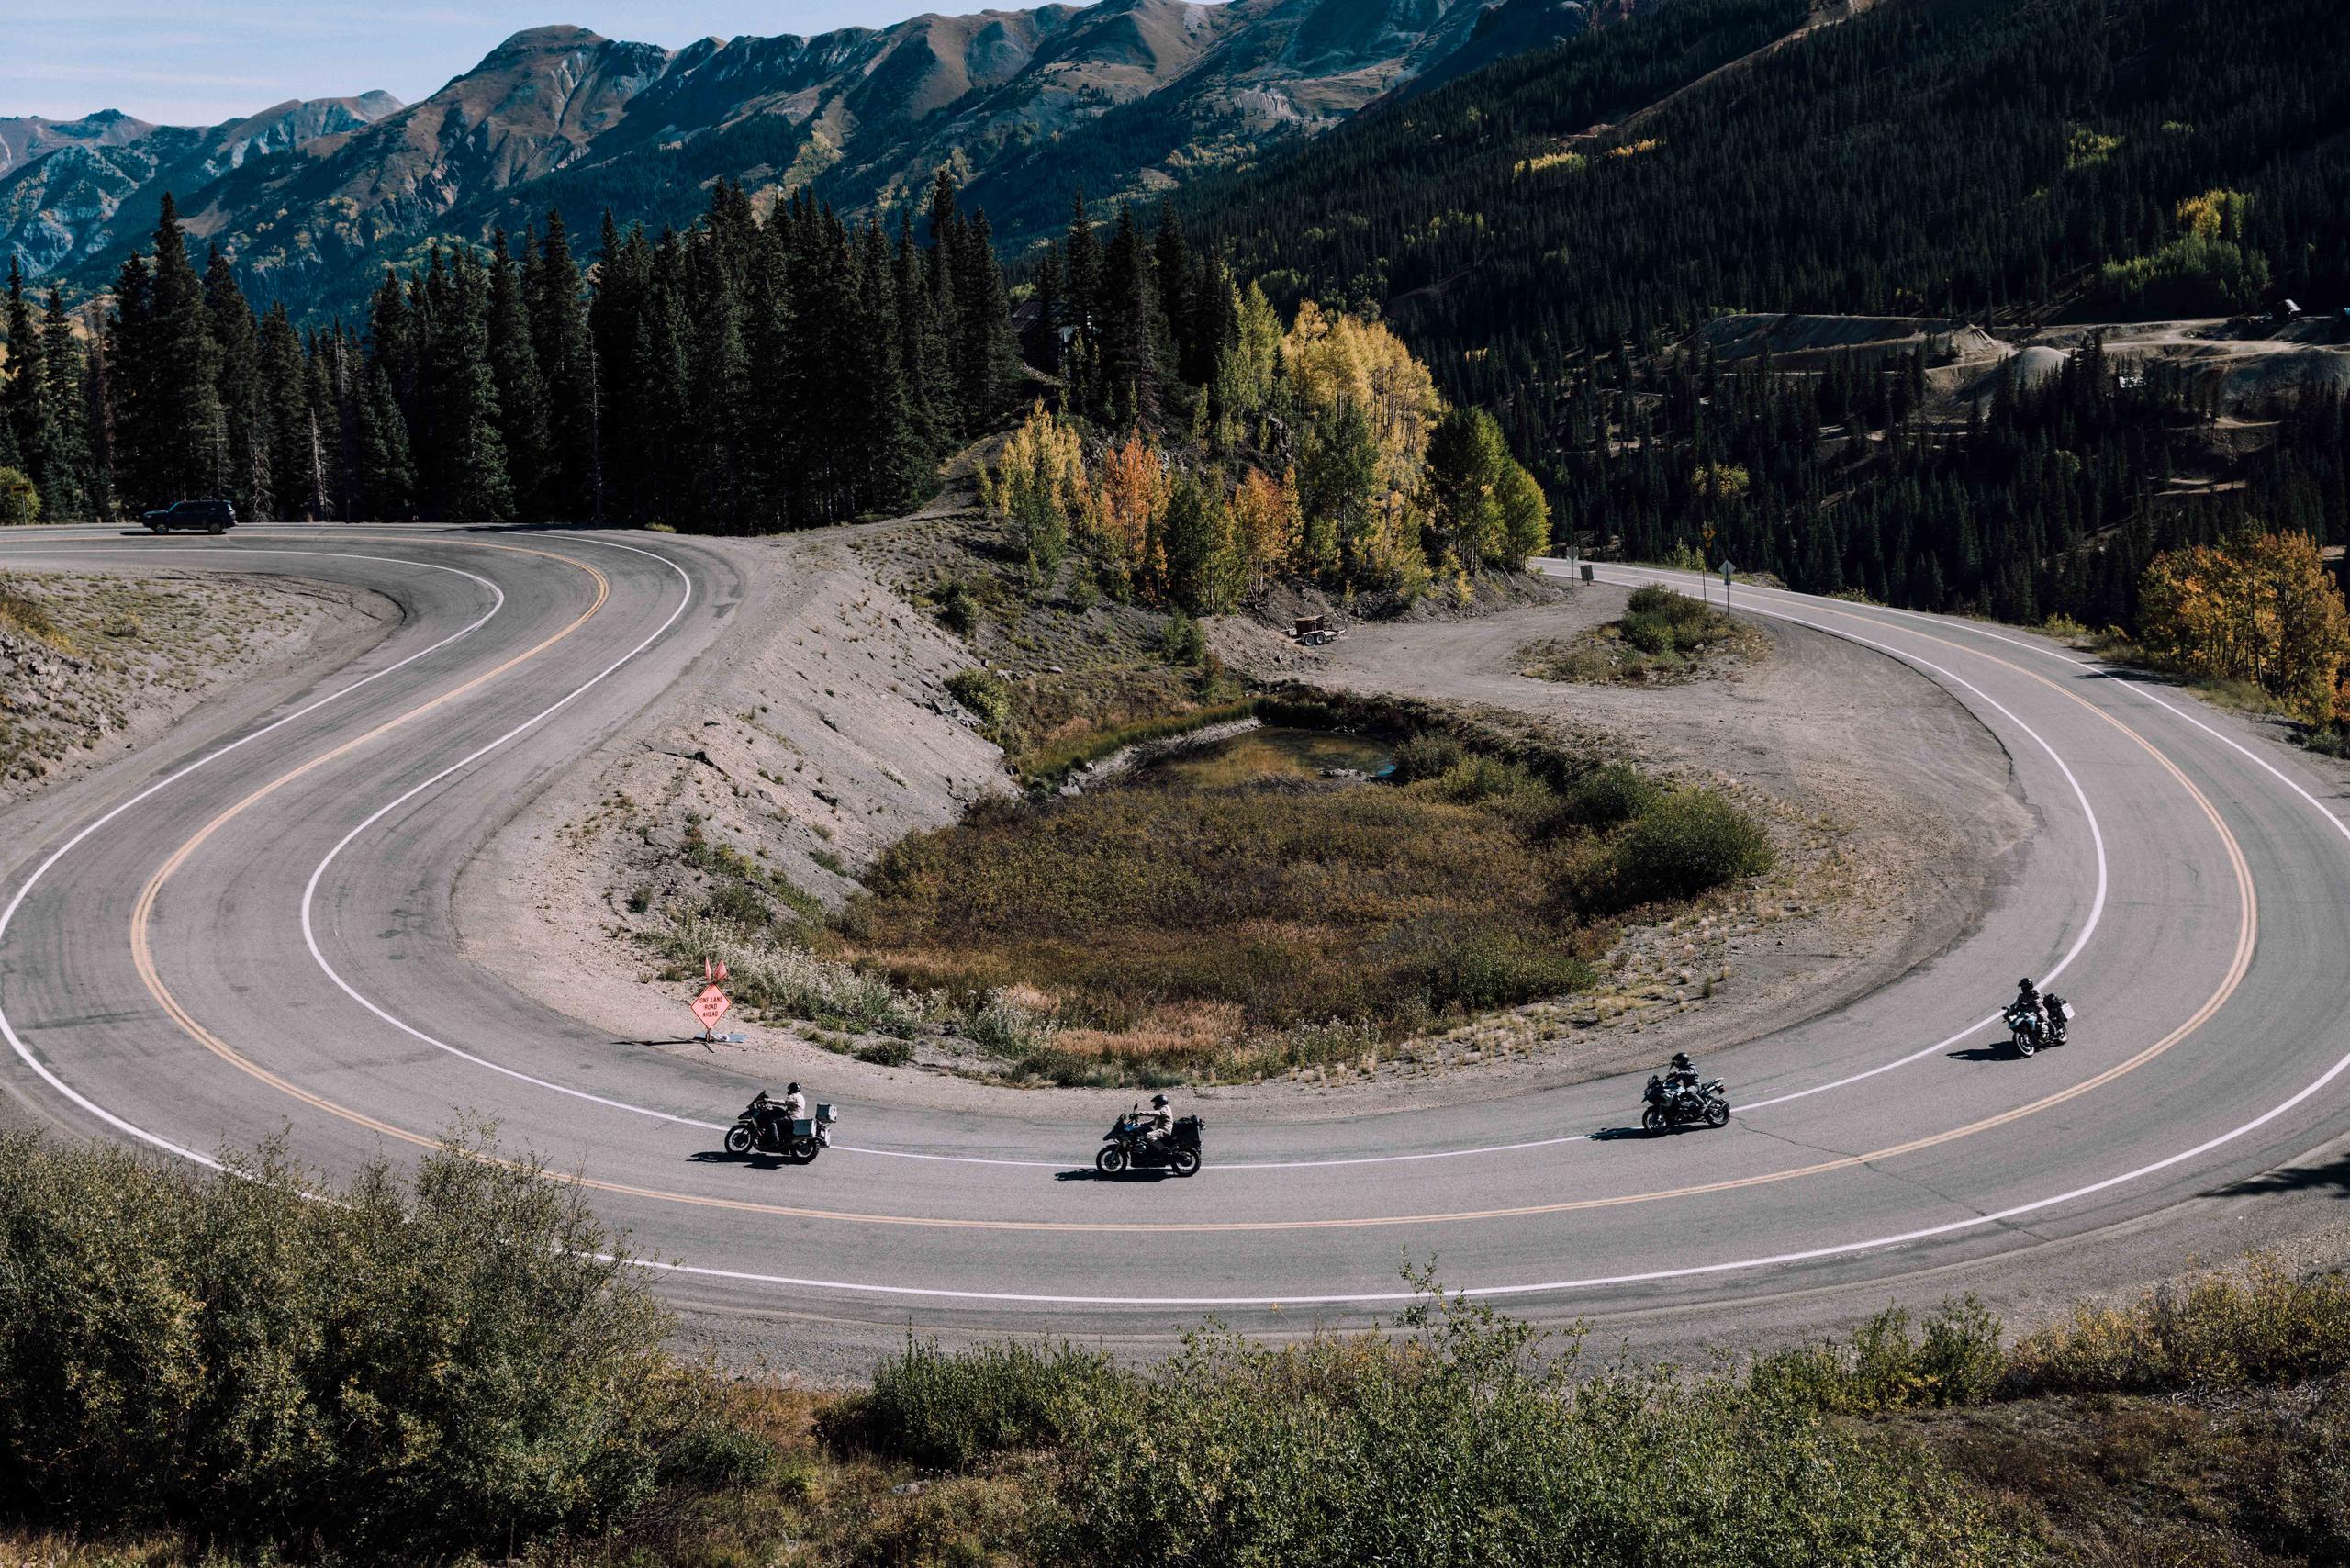 Four motorcyclists on windy road in Colorado